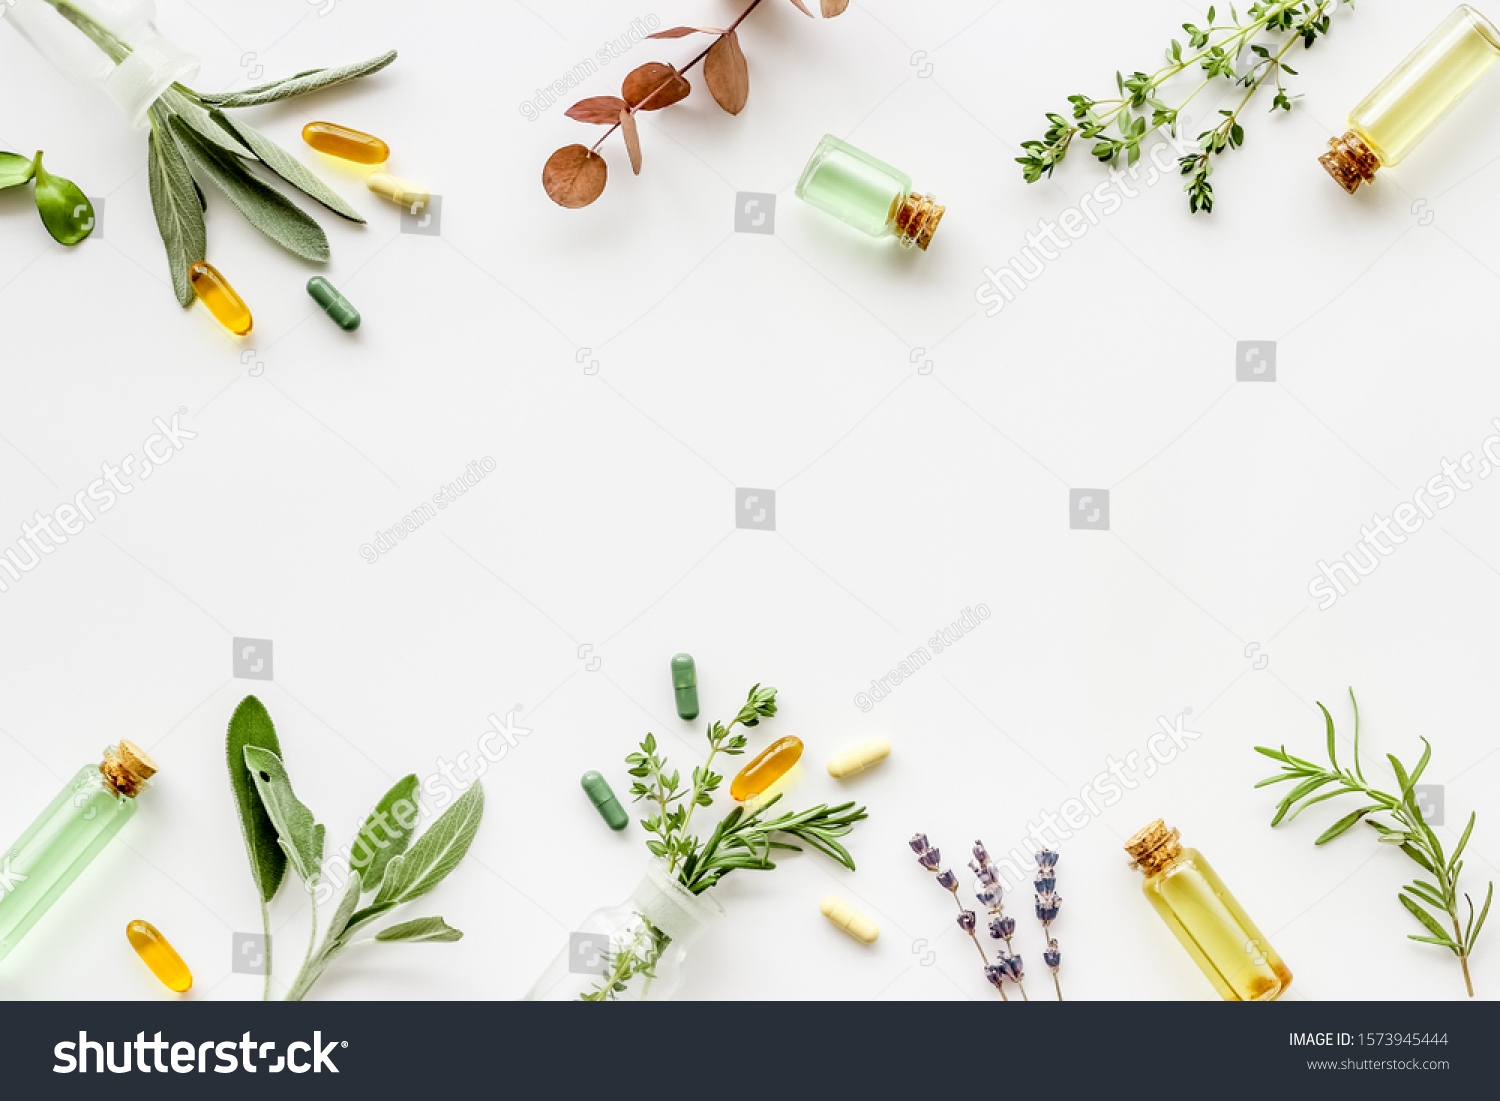 Apothecary of natural wellness and self-care. Herbs and medicine on white background top view frame copy space #1573945444